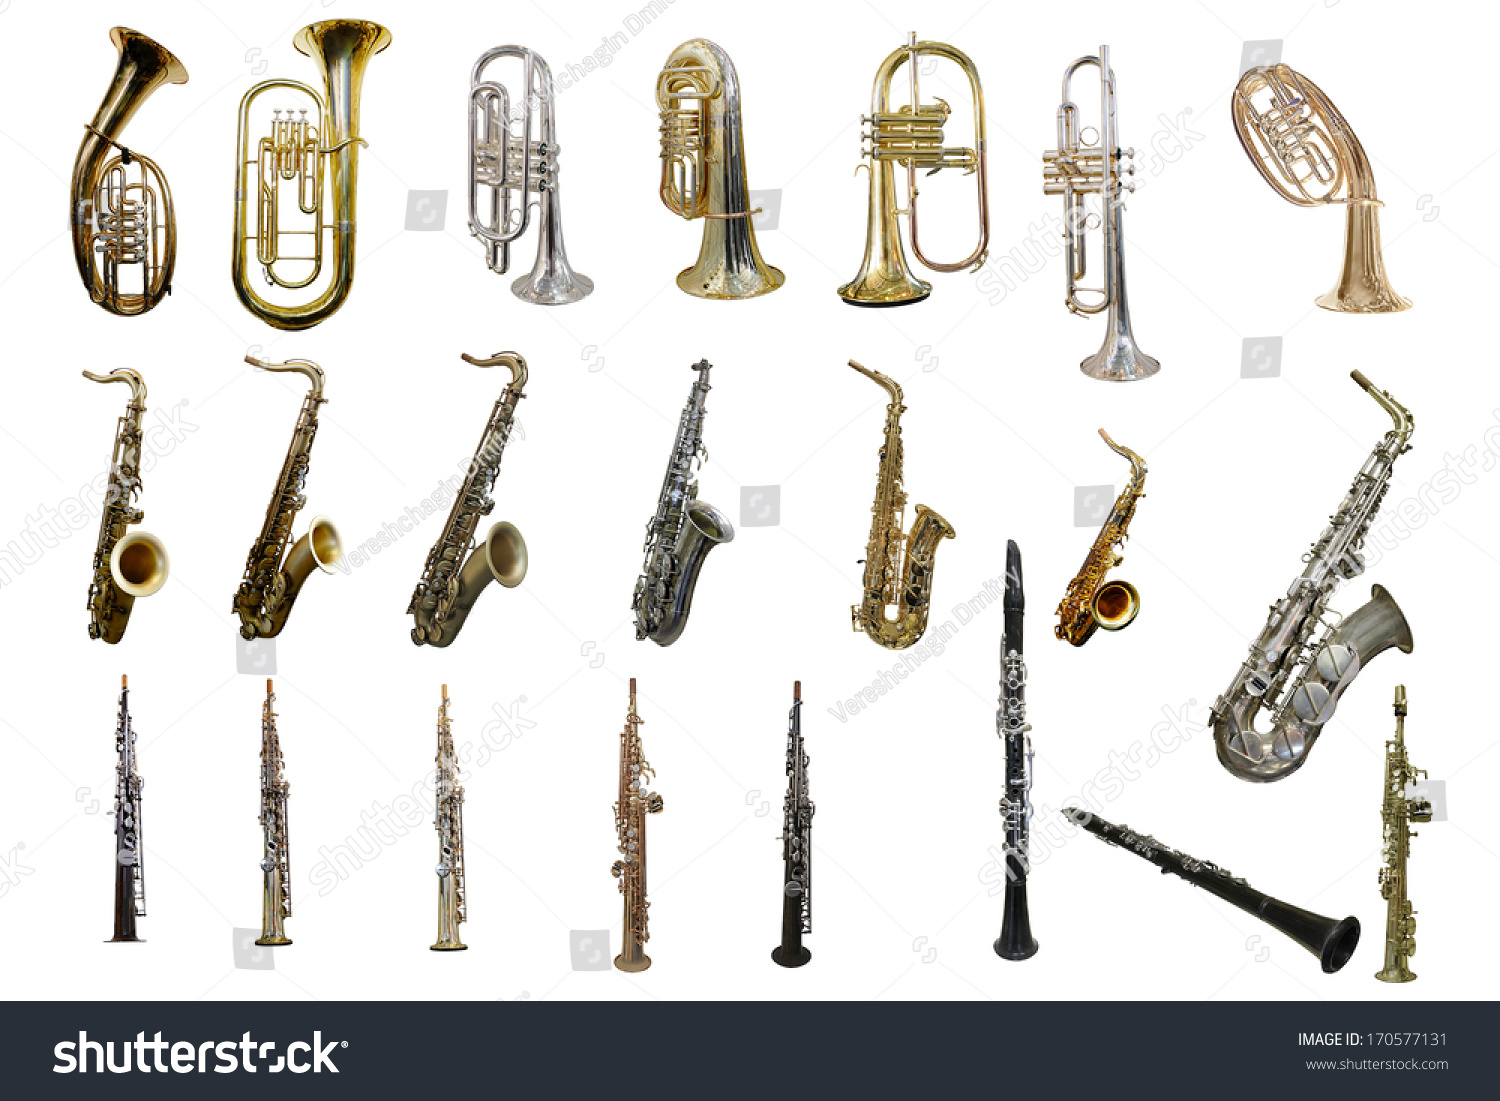 The Image Of Wind Instruments Isolated Under A White Background Stock ...